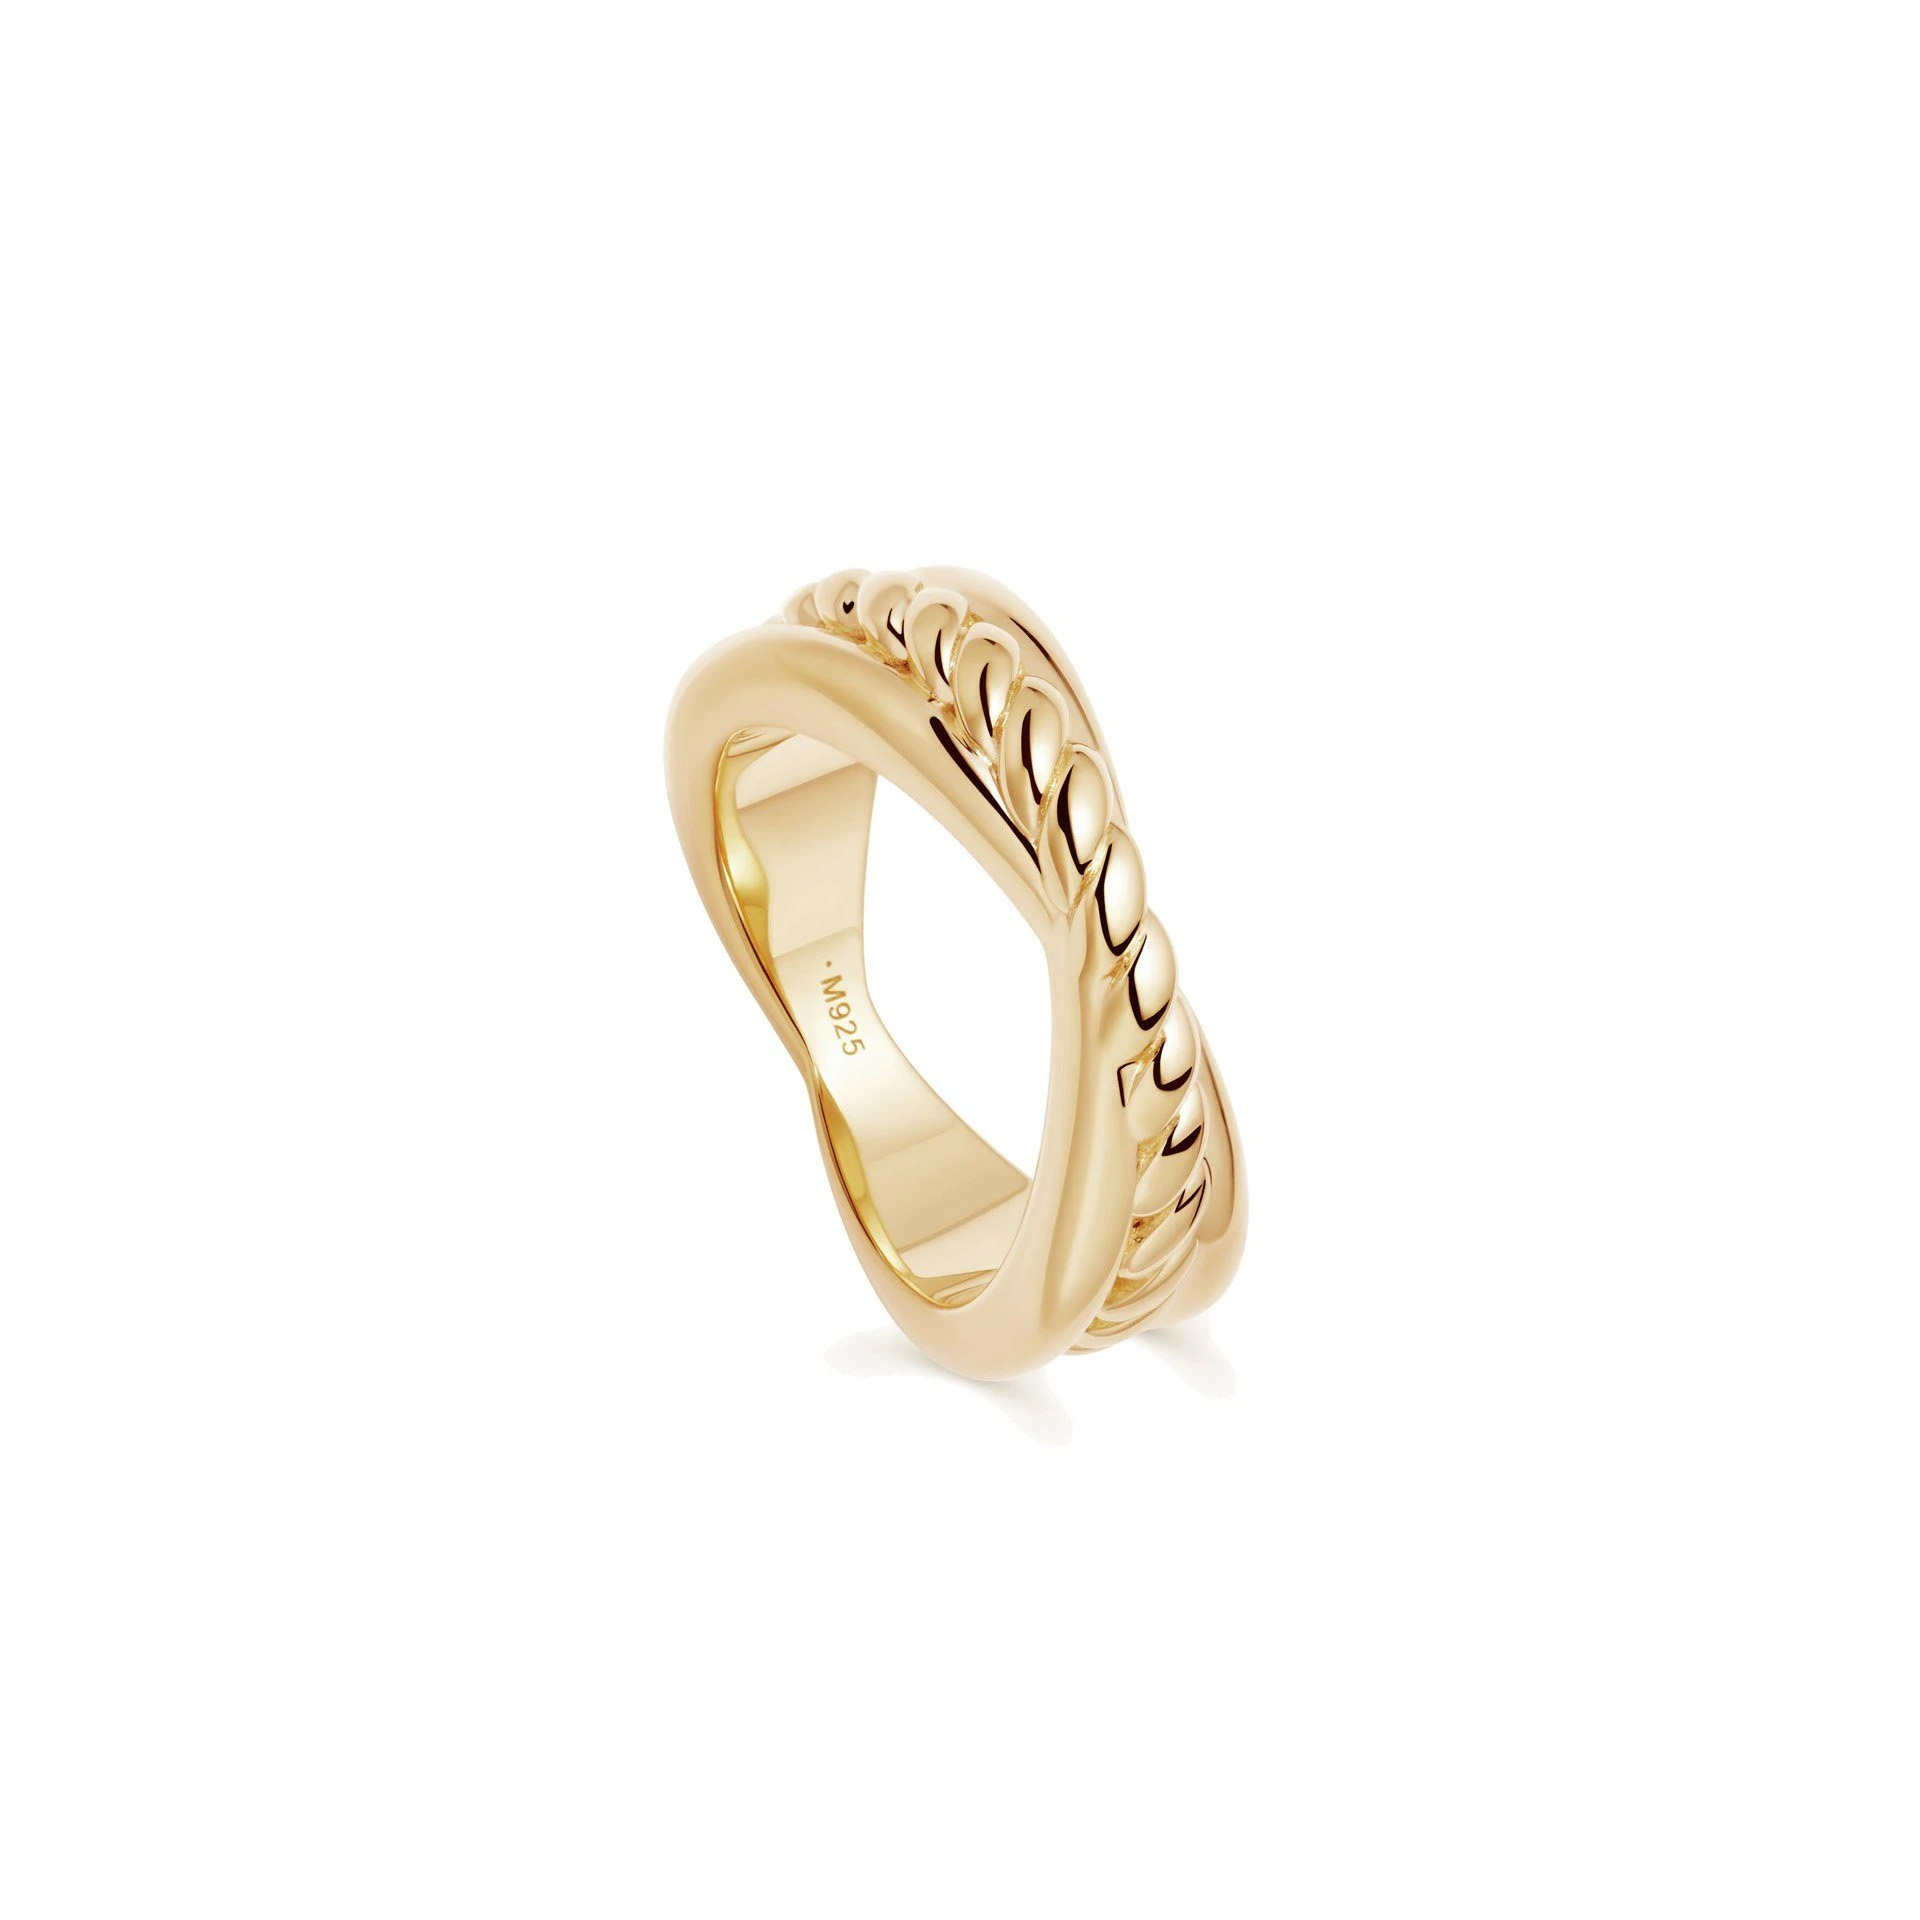 Wholesale OEM ring features a OEM/ODM Jewelry rope design and is crafted in 18ct gold vermeil